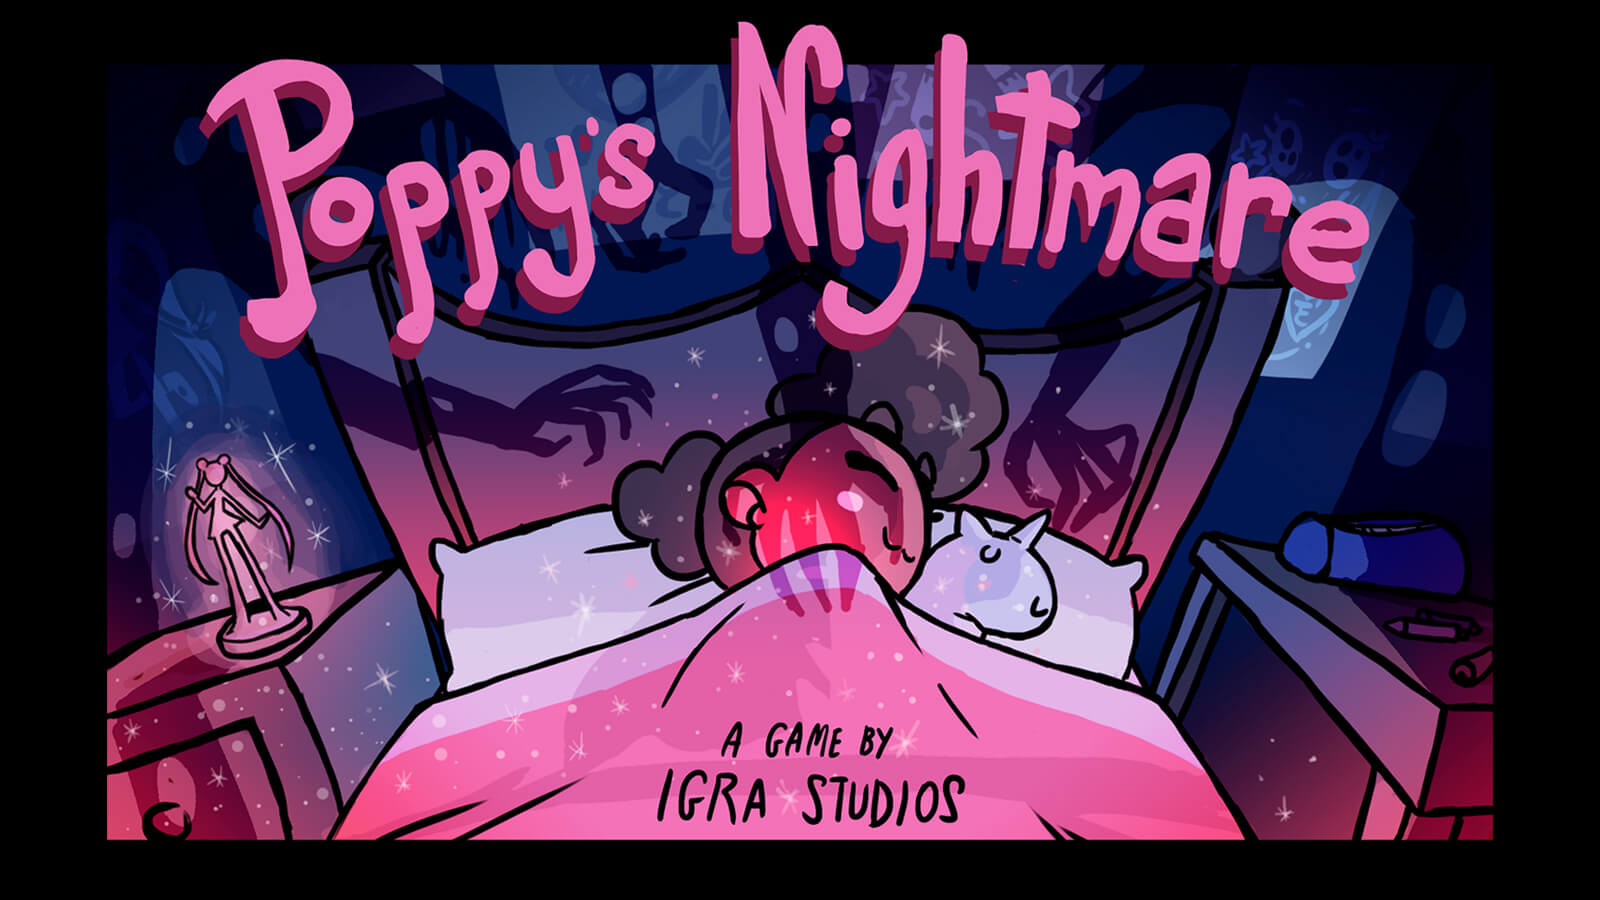 The title screen for Poppy's Nightmare, showing the main character sleeping in bed as scary, silhouetted hands reach towards her.